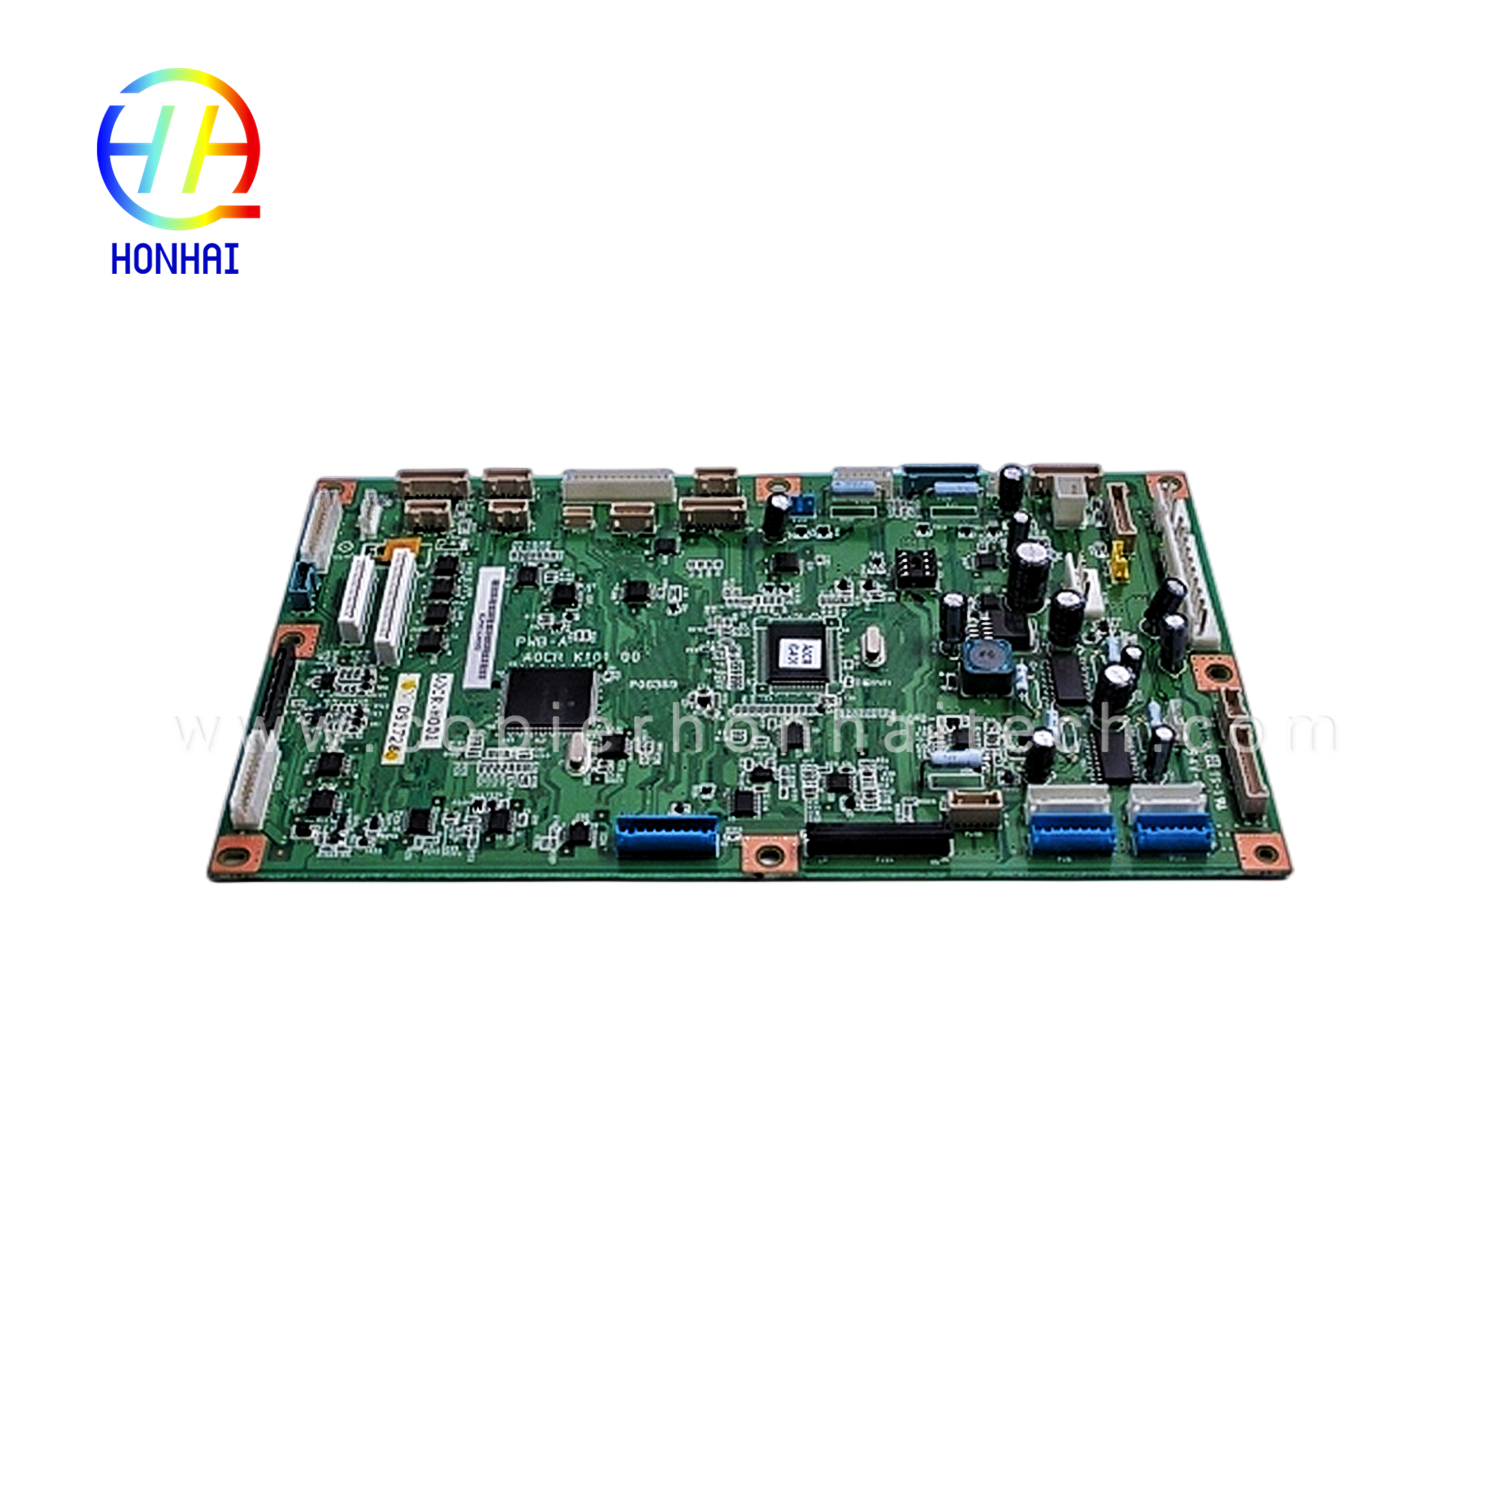 Engine Ctlr MCU Board Mfpb Assembly for Xerox Workcentre 6400 960K51970